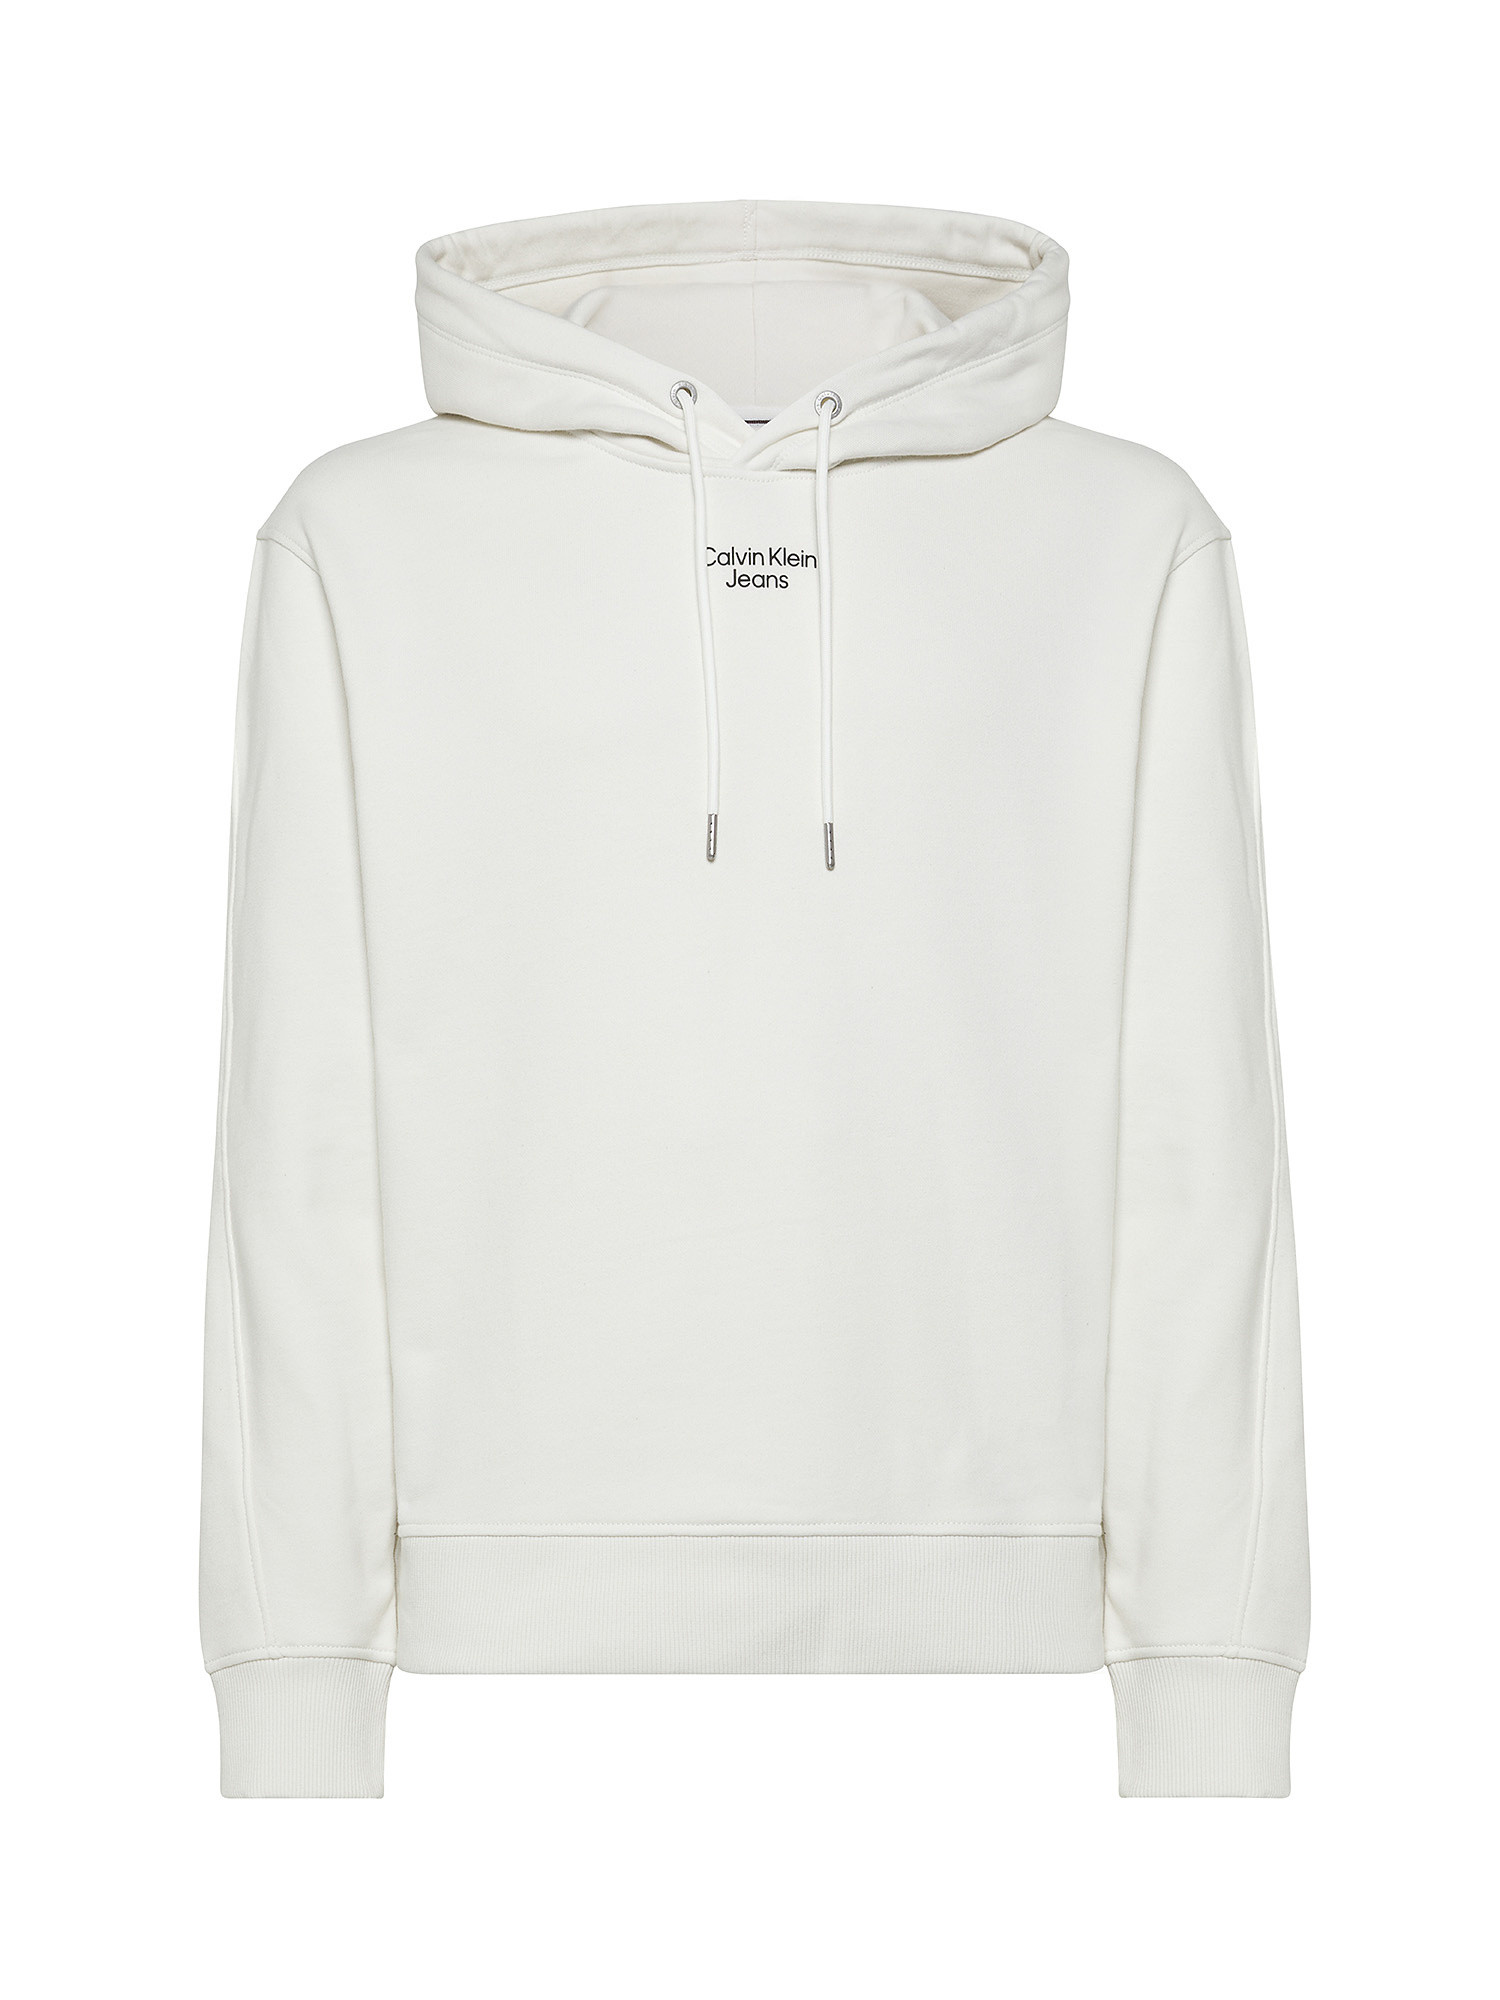 Calvin Klein Jeans - Relaxed fit sweatshirt in cotton with logo, White, large image number 0